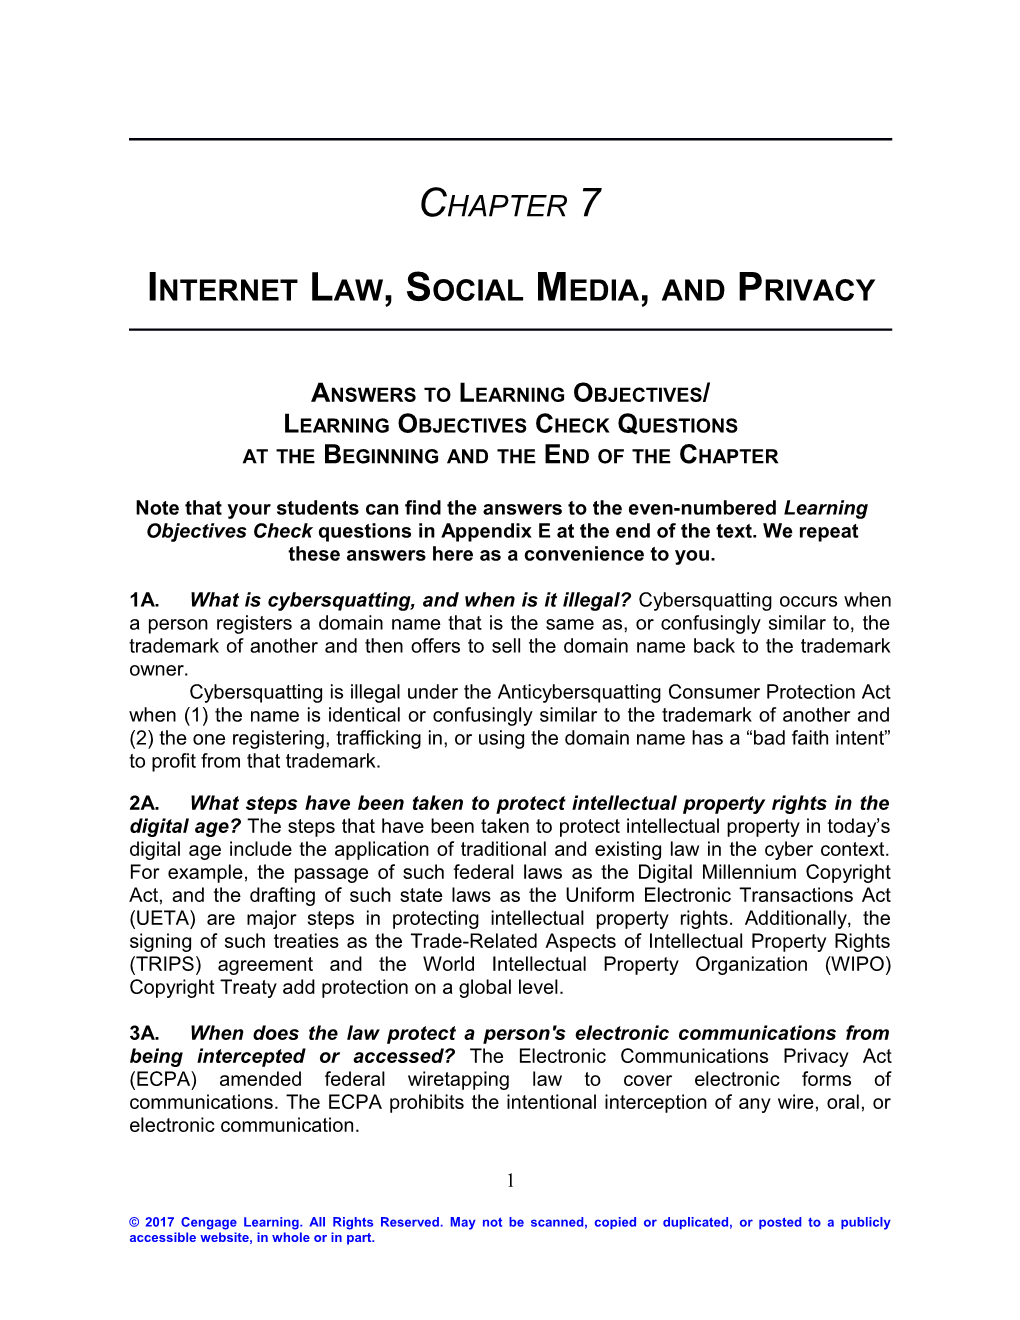 Chapter 7: Internet Law, Social Media, and Privacy 1